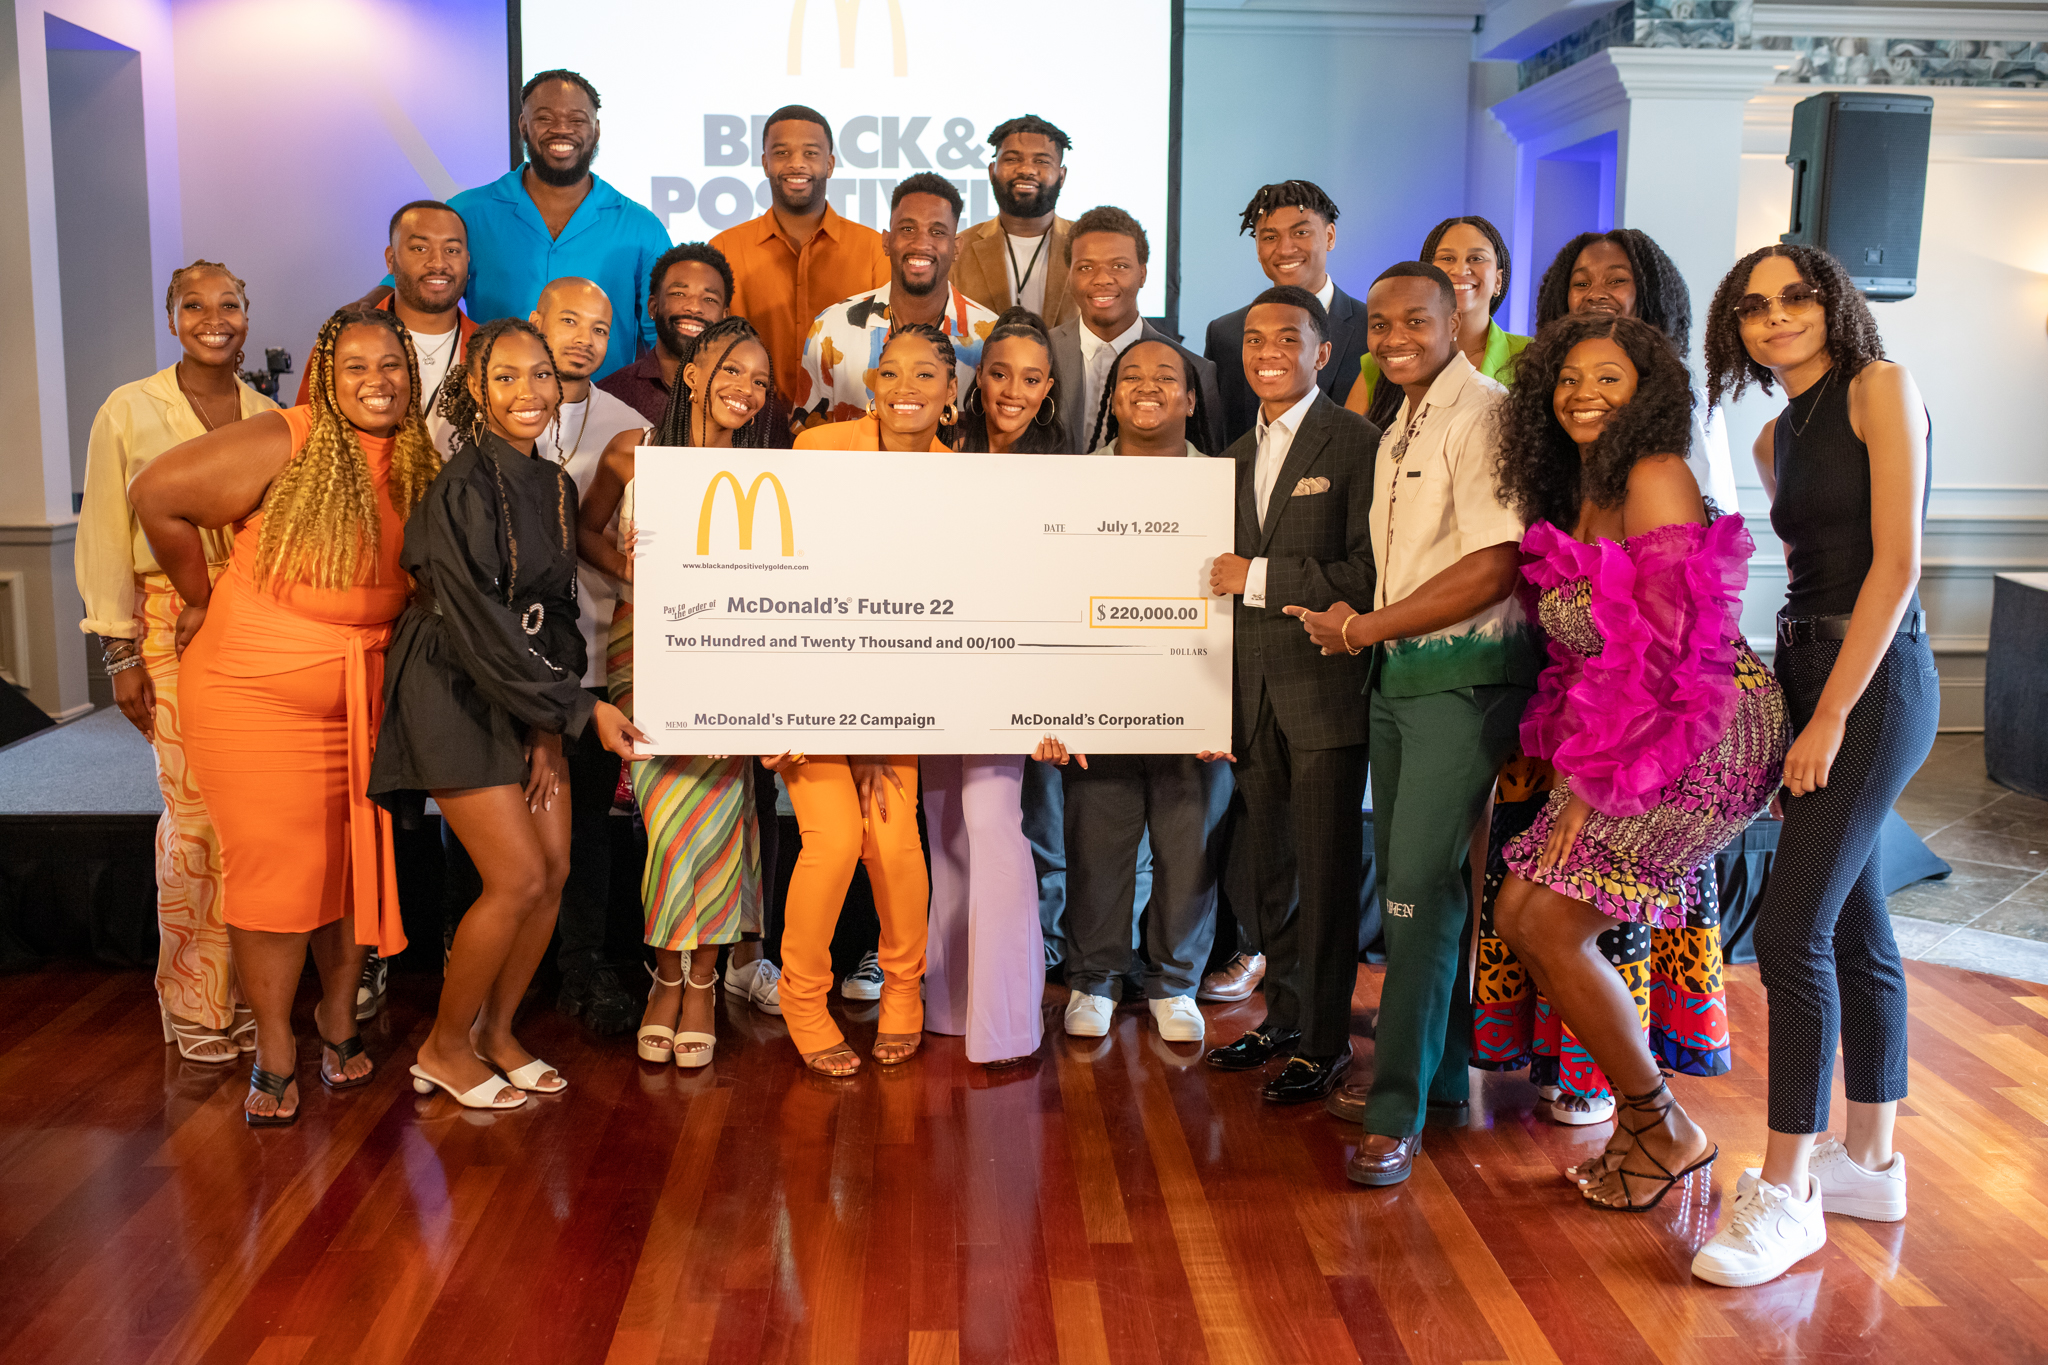 Keke Palmer and McDonald’s Team Up to Award 0,000 in Grants to 22 Young Black Leaders